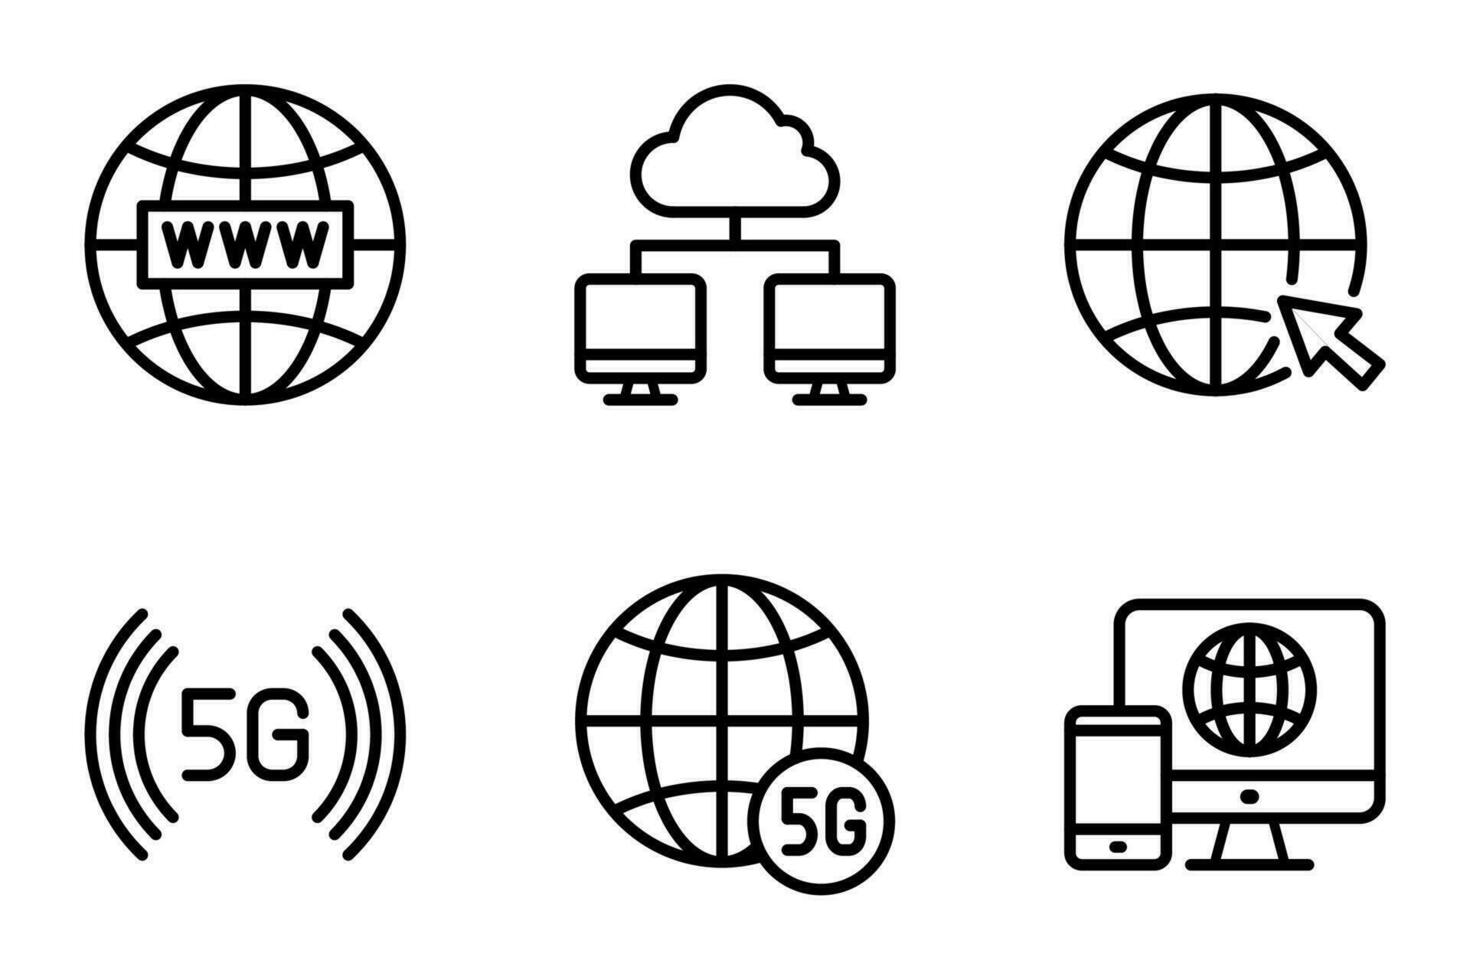 set of icons for internet and networking. network, website, wireless, server, signal, hosting, signs, computing vector